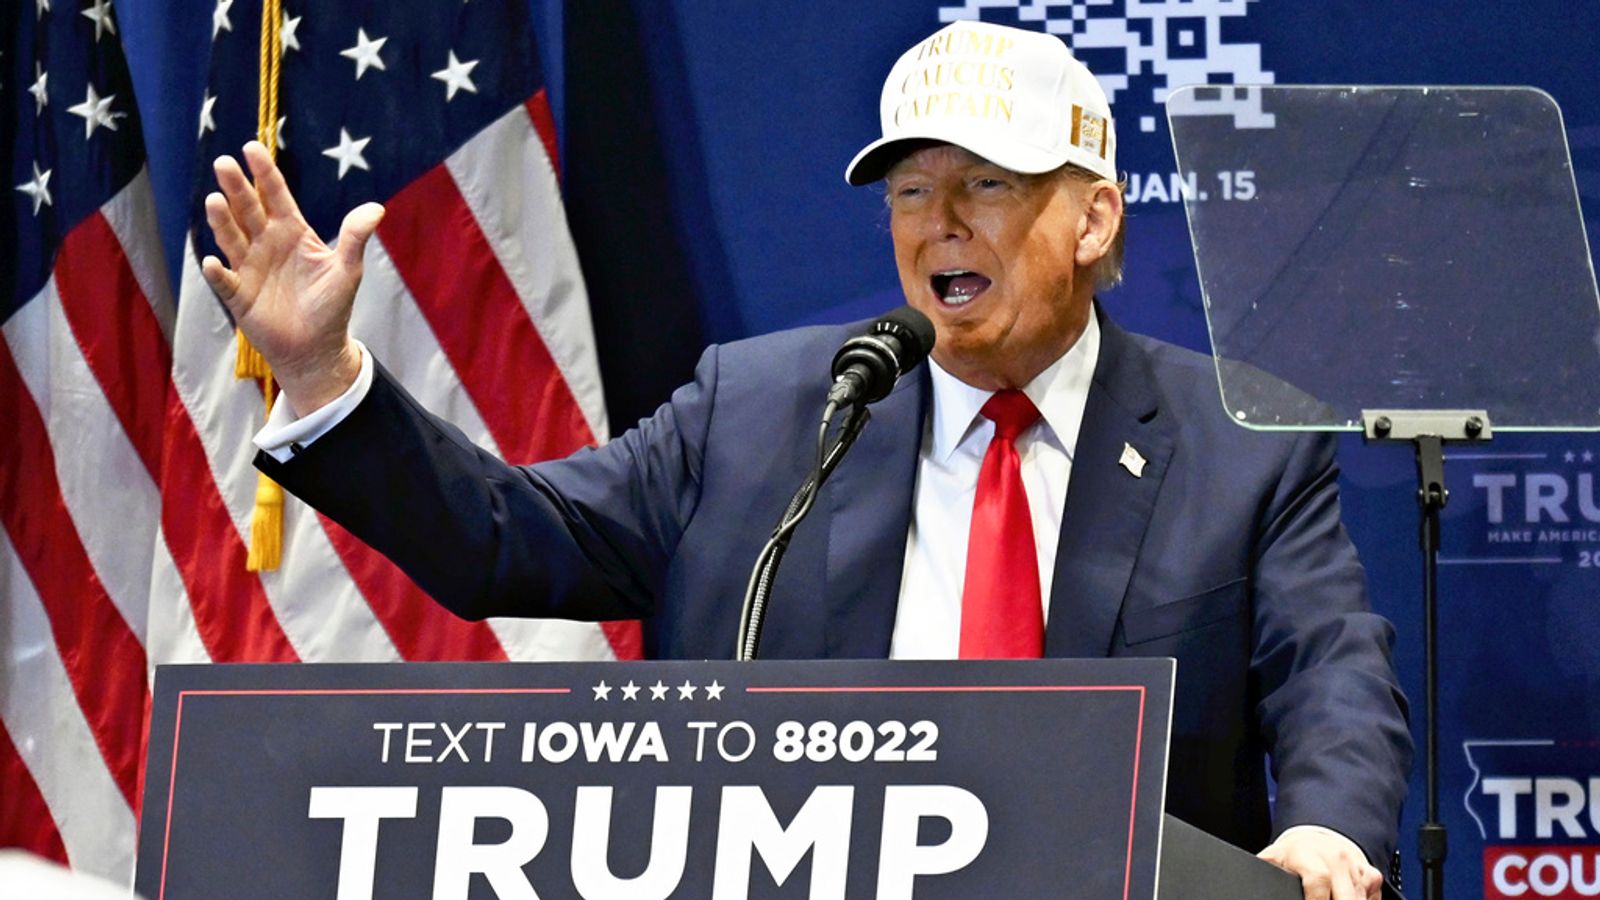 Donald Trump wins Iowa caucuses, solidifying his position as the leading Republican candidate for the 2024 presidential race